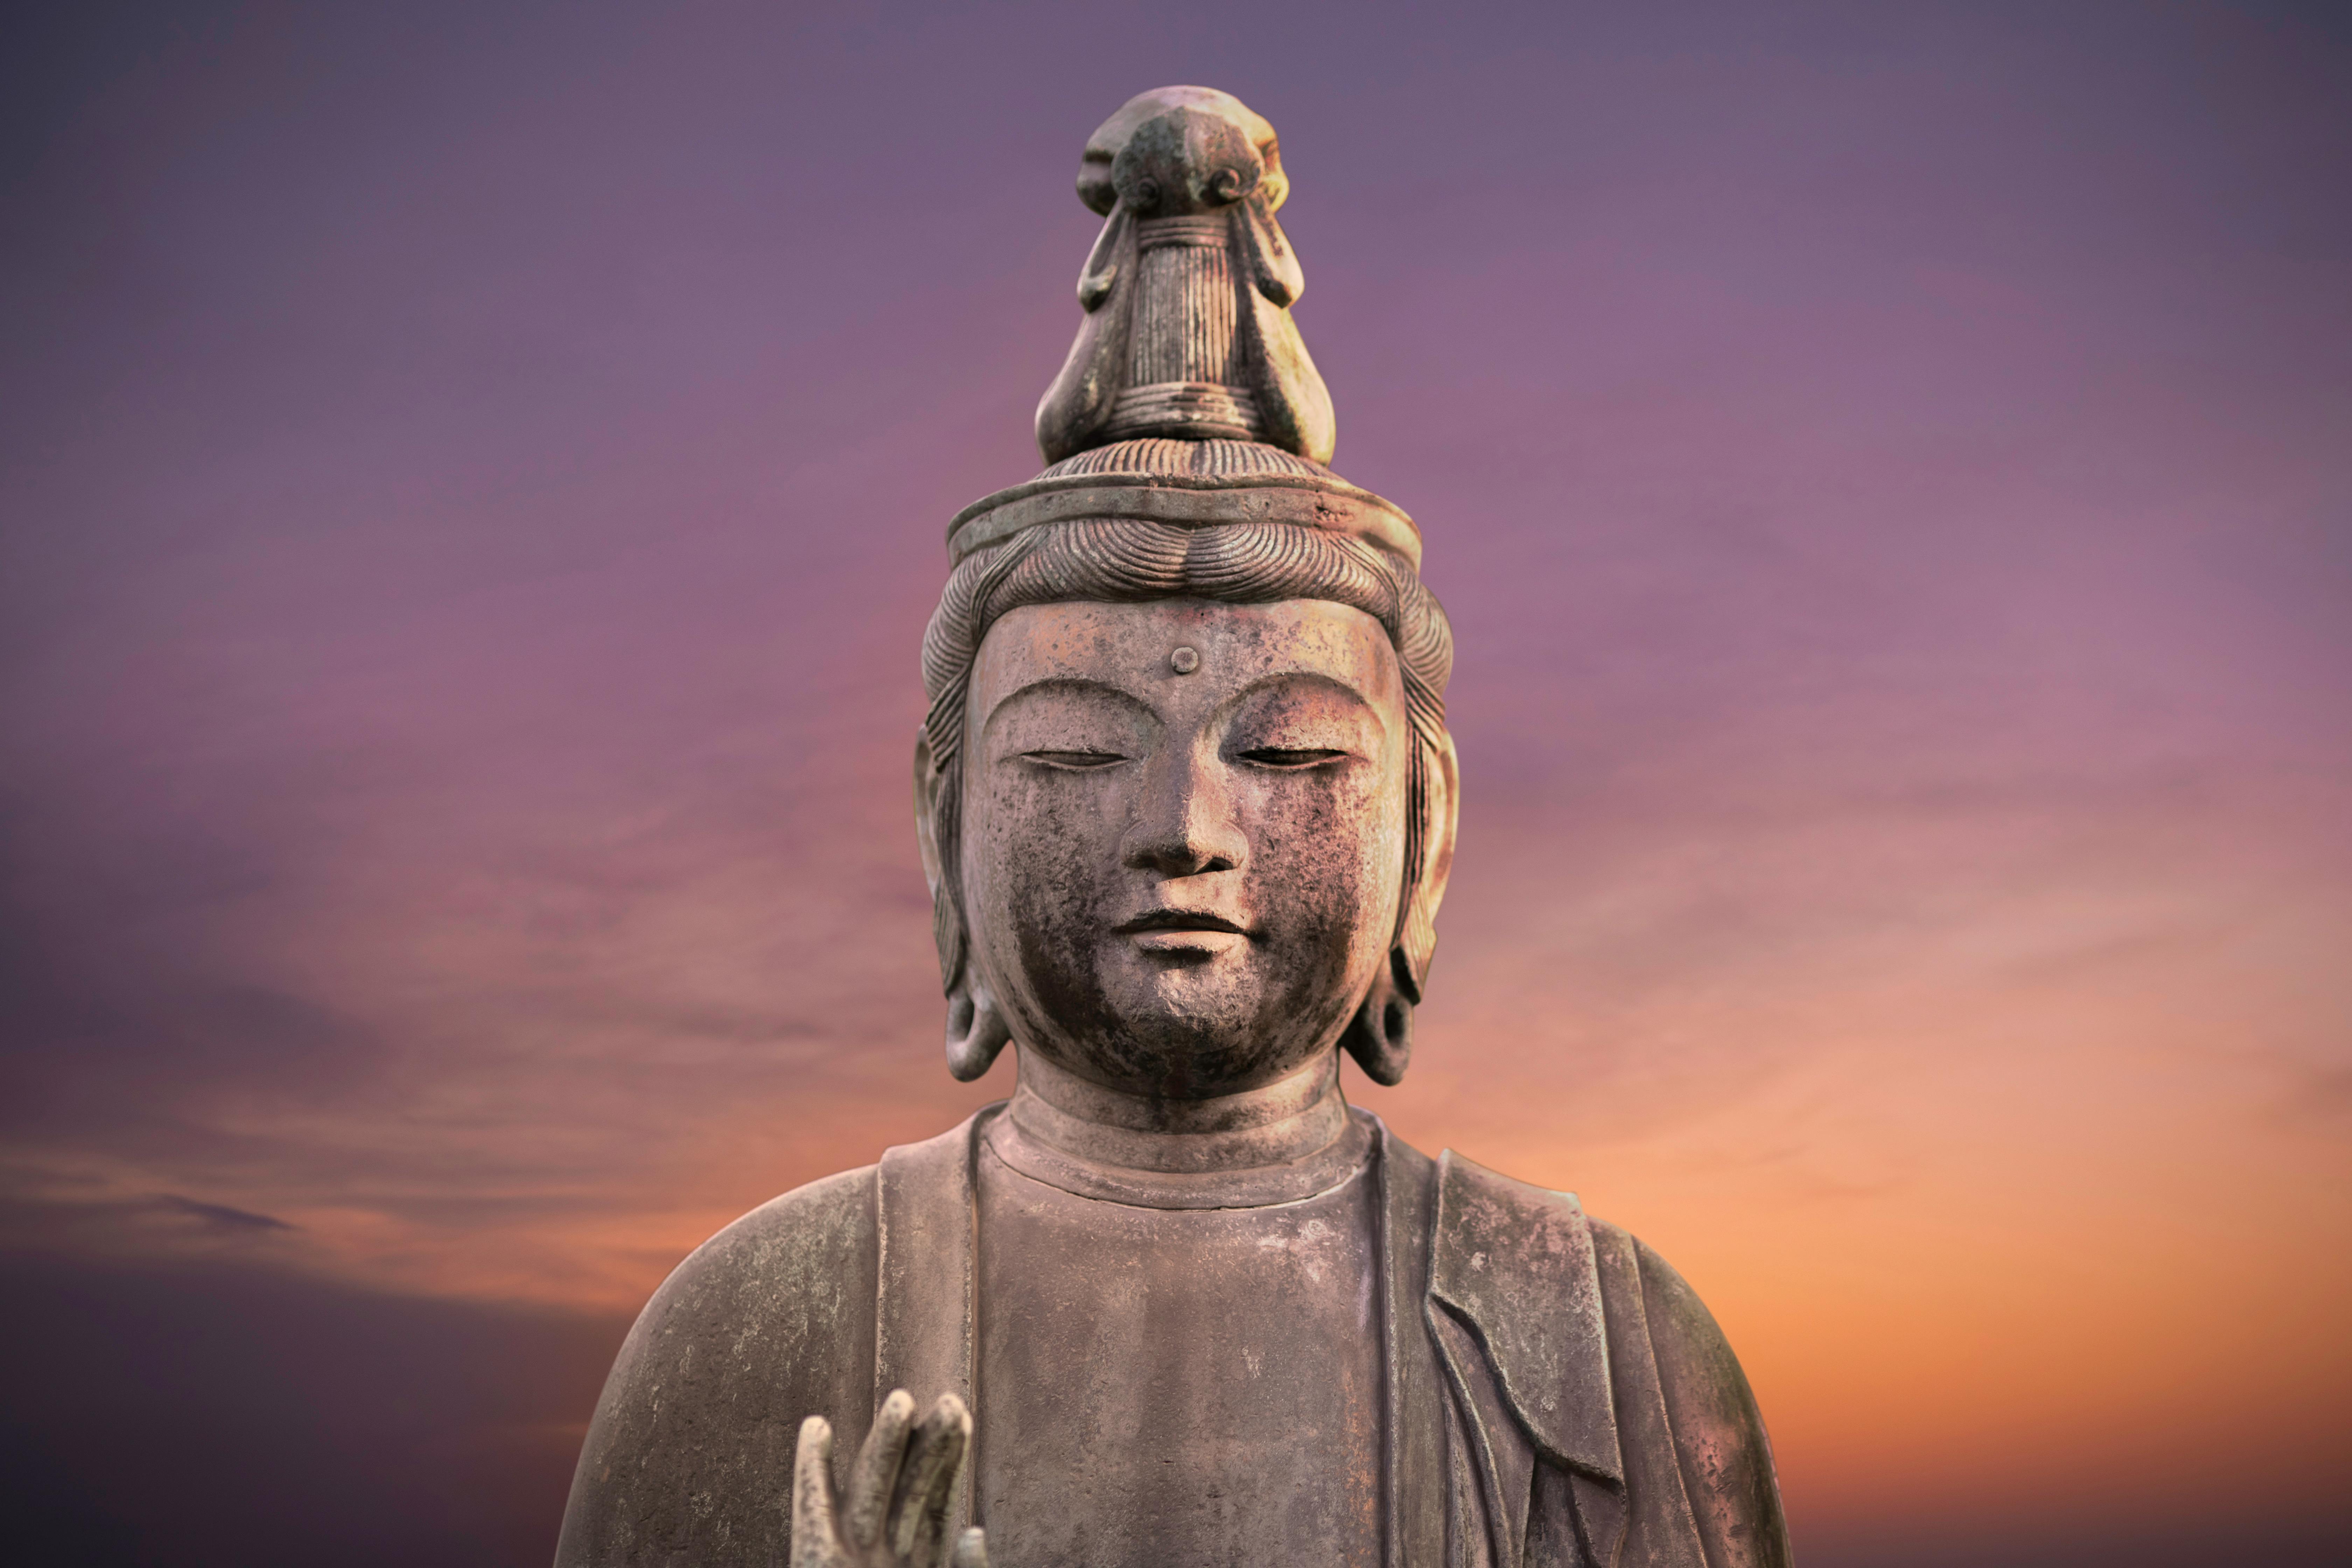 buddha hd phone wallpaper for android and ios devices  Hd phone wallpapers  Android wallpaper Buddha